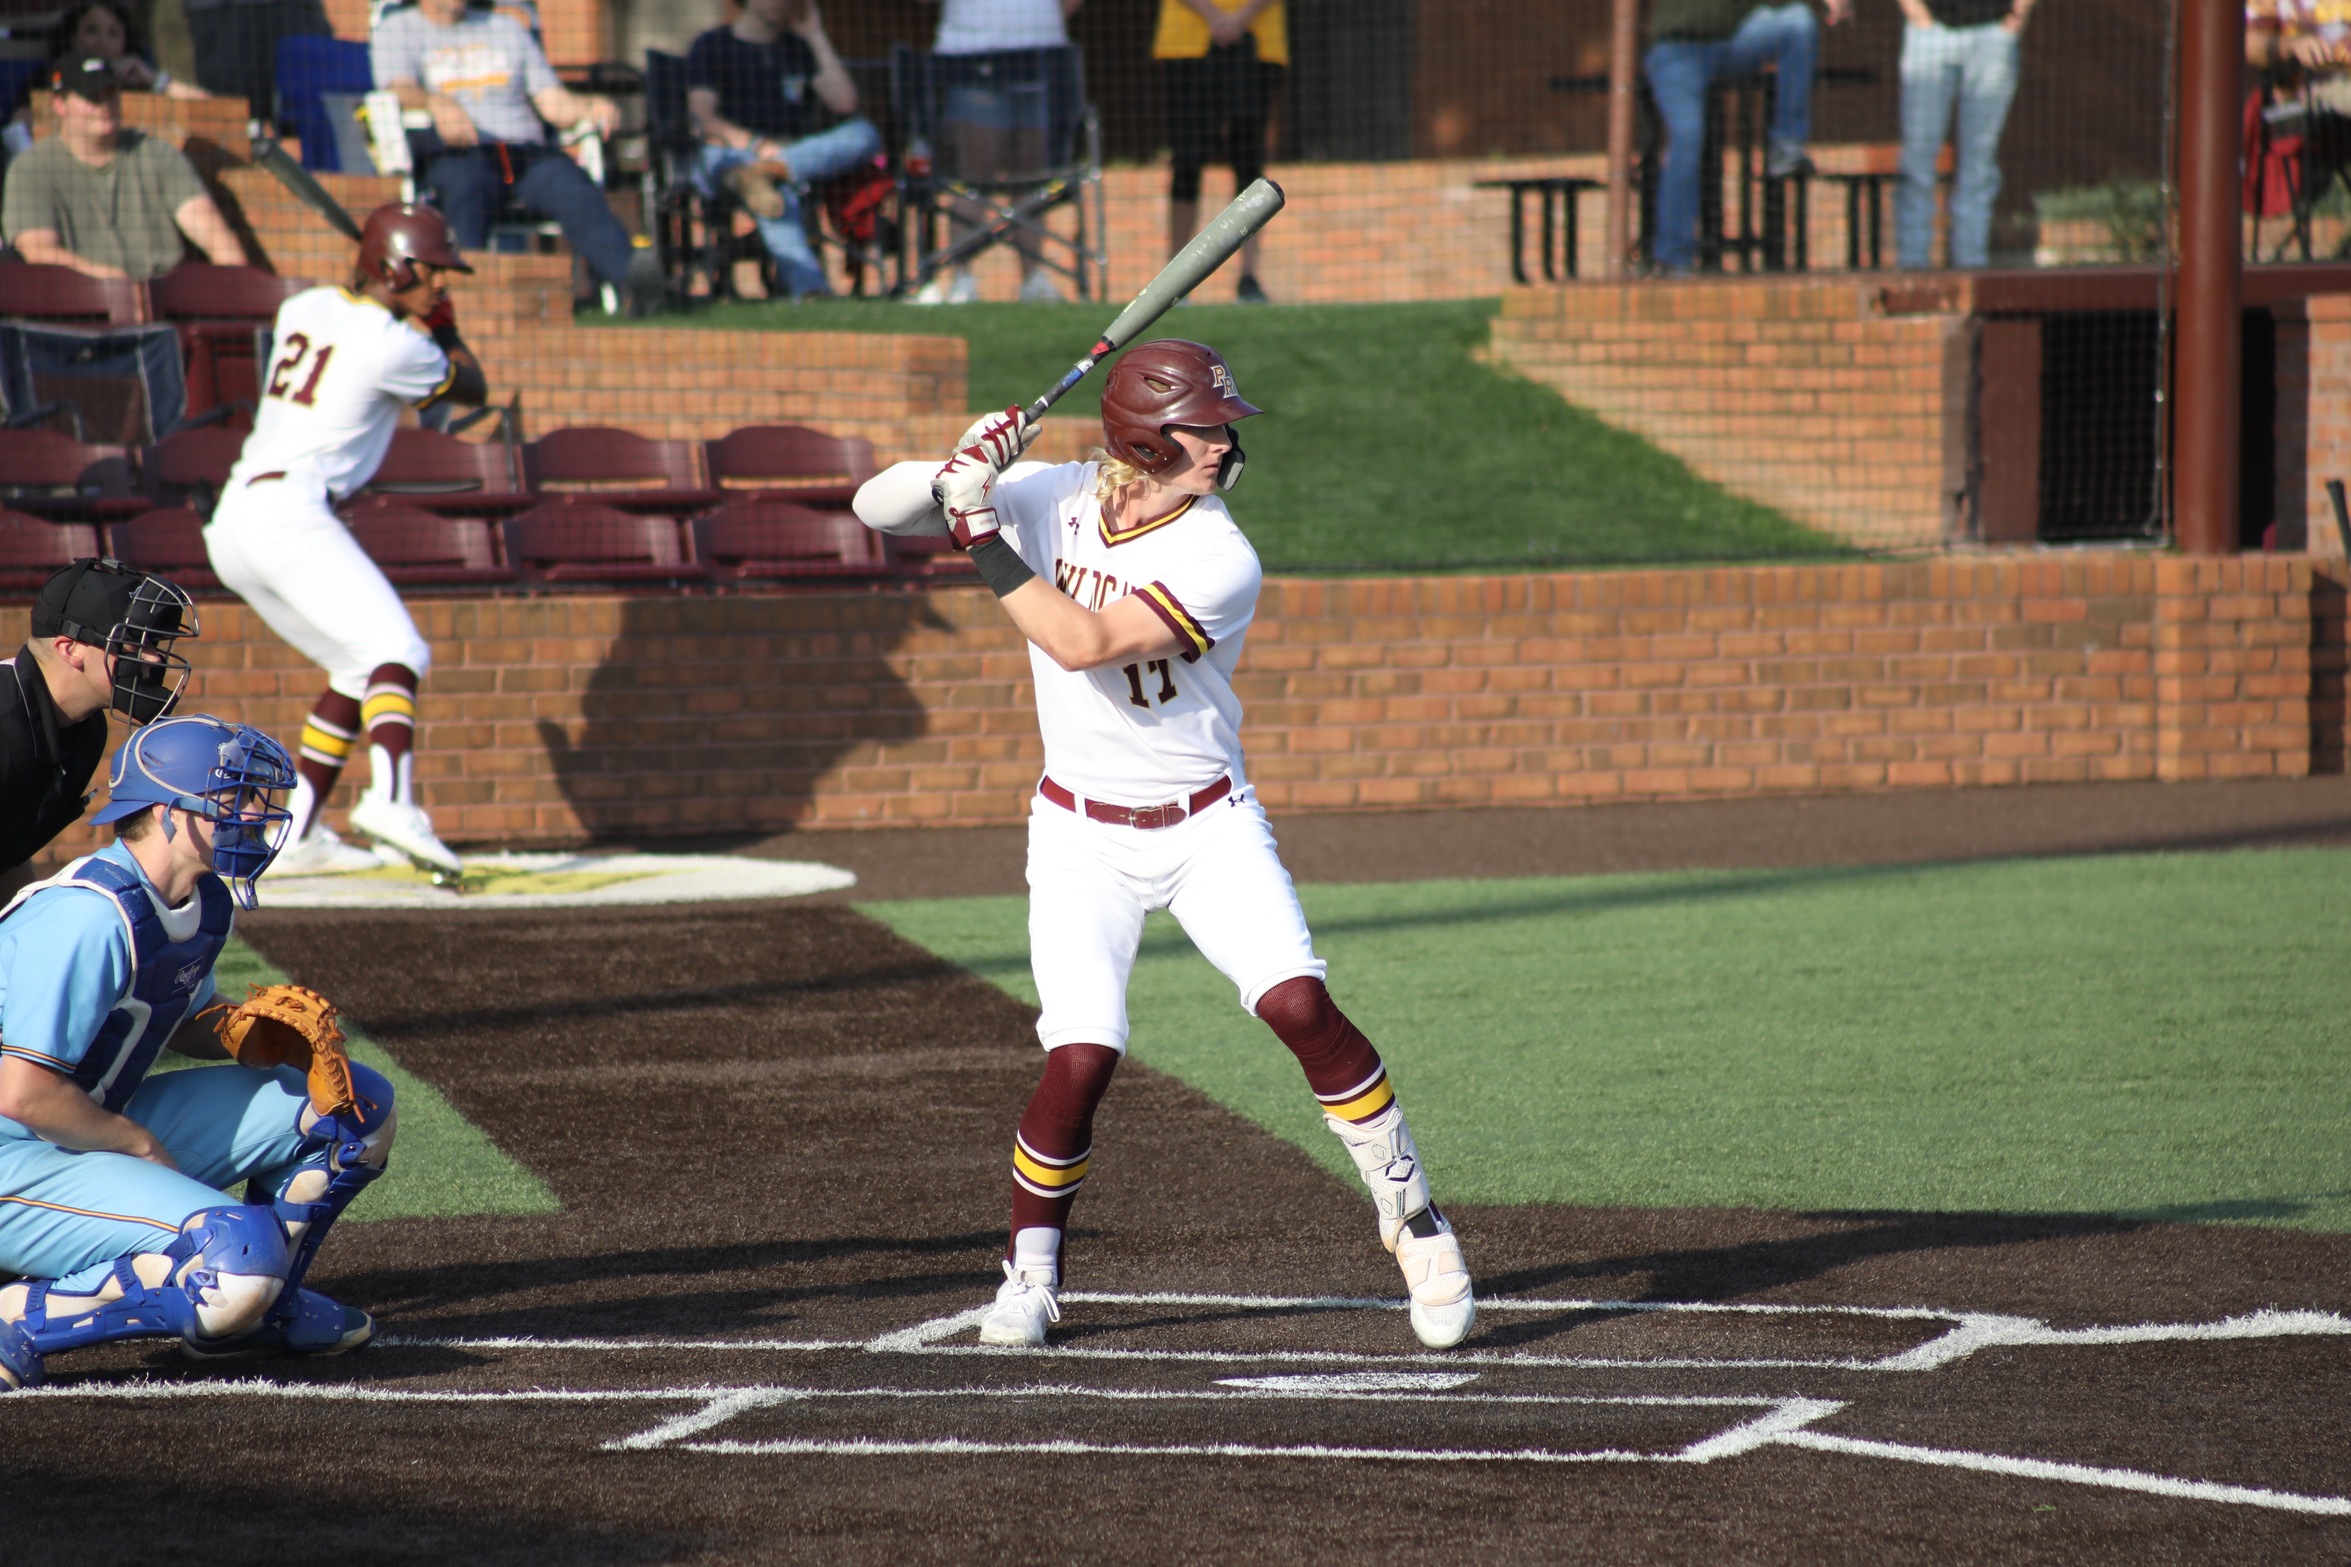 Hot bats, dominant pitching lead No. 2 Pearl River past Southwest